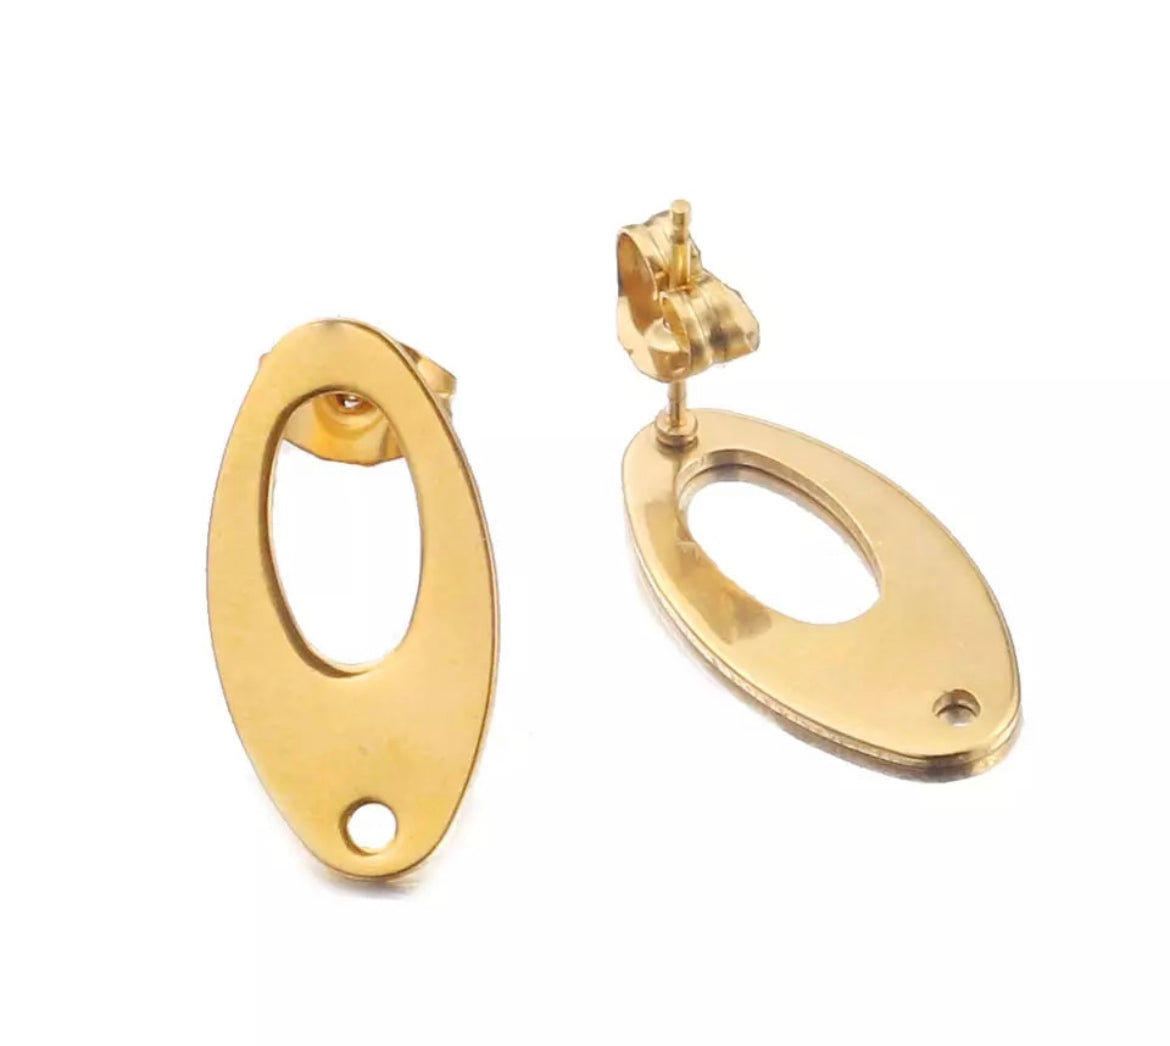 Oval shape gold plated stainless steel studs top x 20 pieces (10 studs & 10 backs)